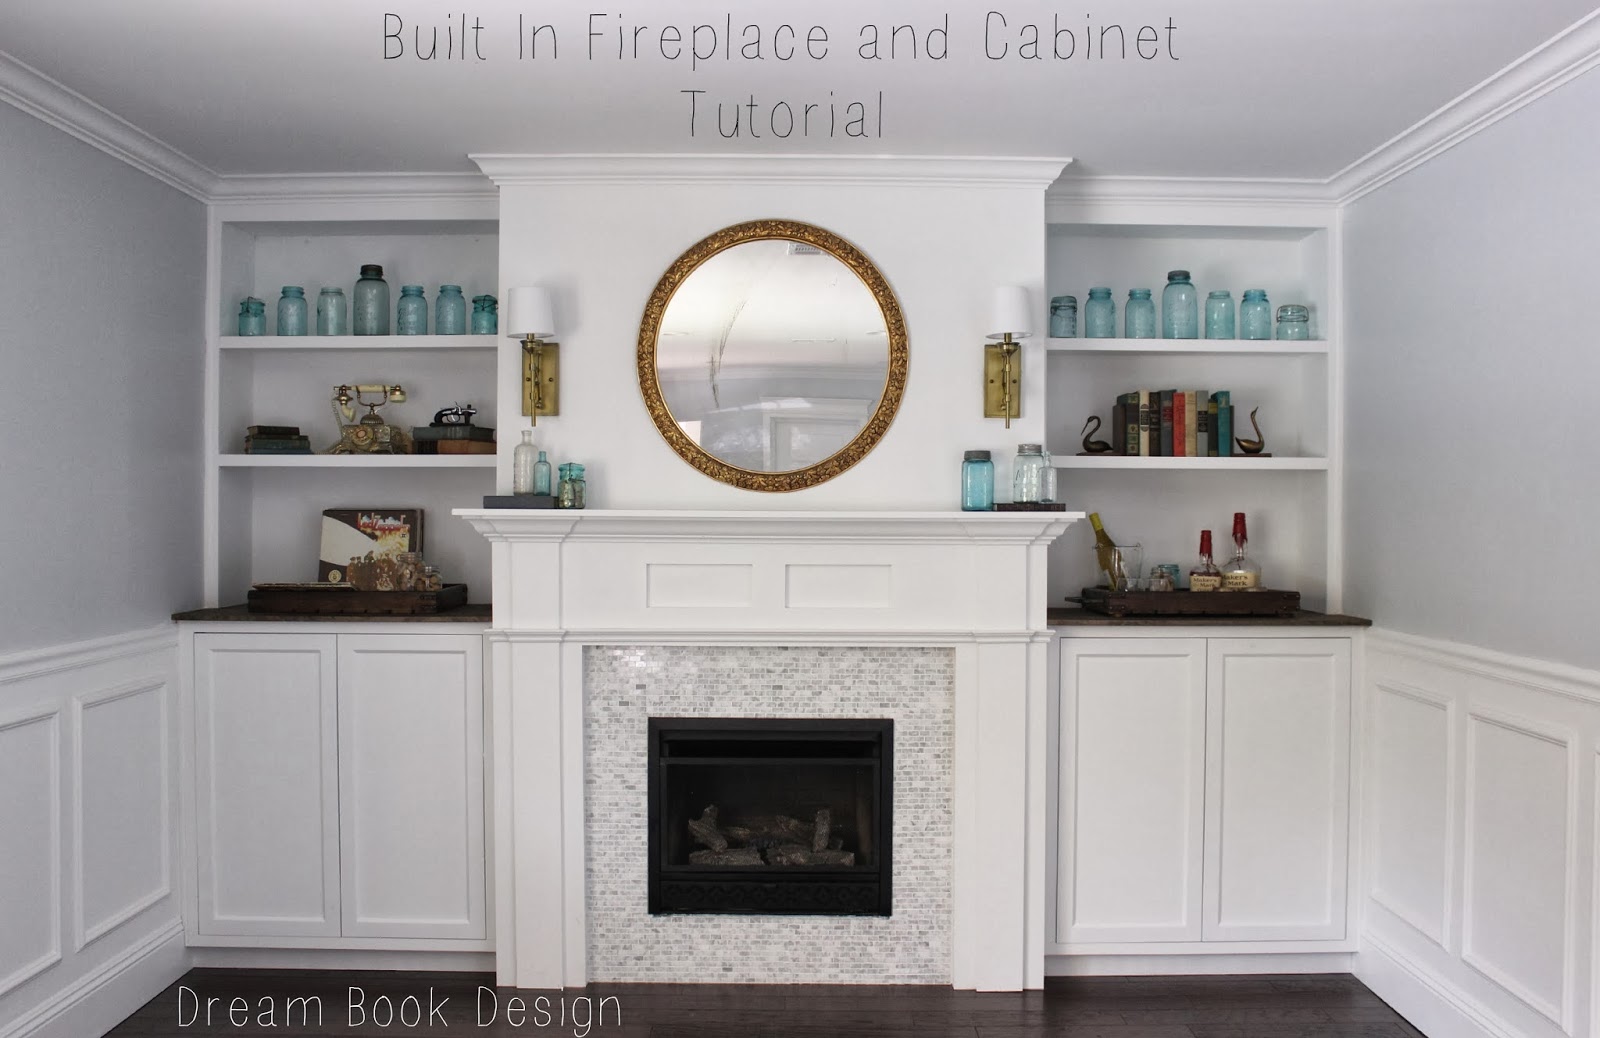 Fireplace And Cabinets Tutorial, How To Build Bookcases Around A Fireplace